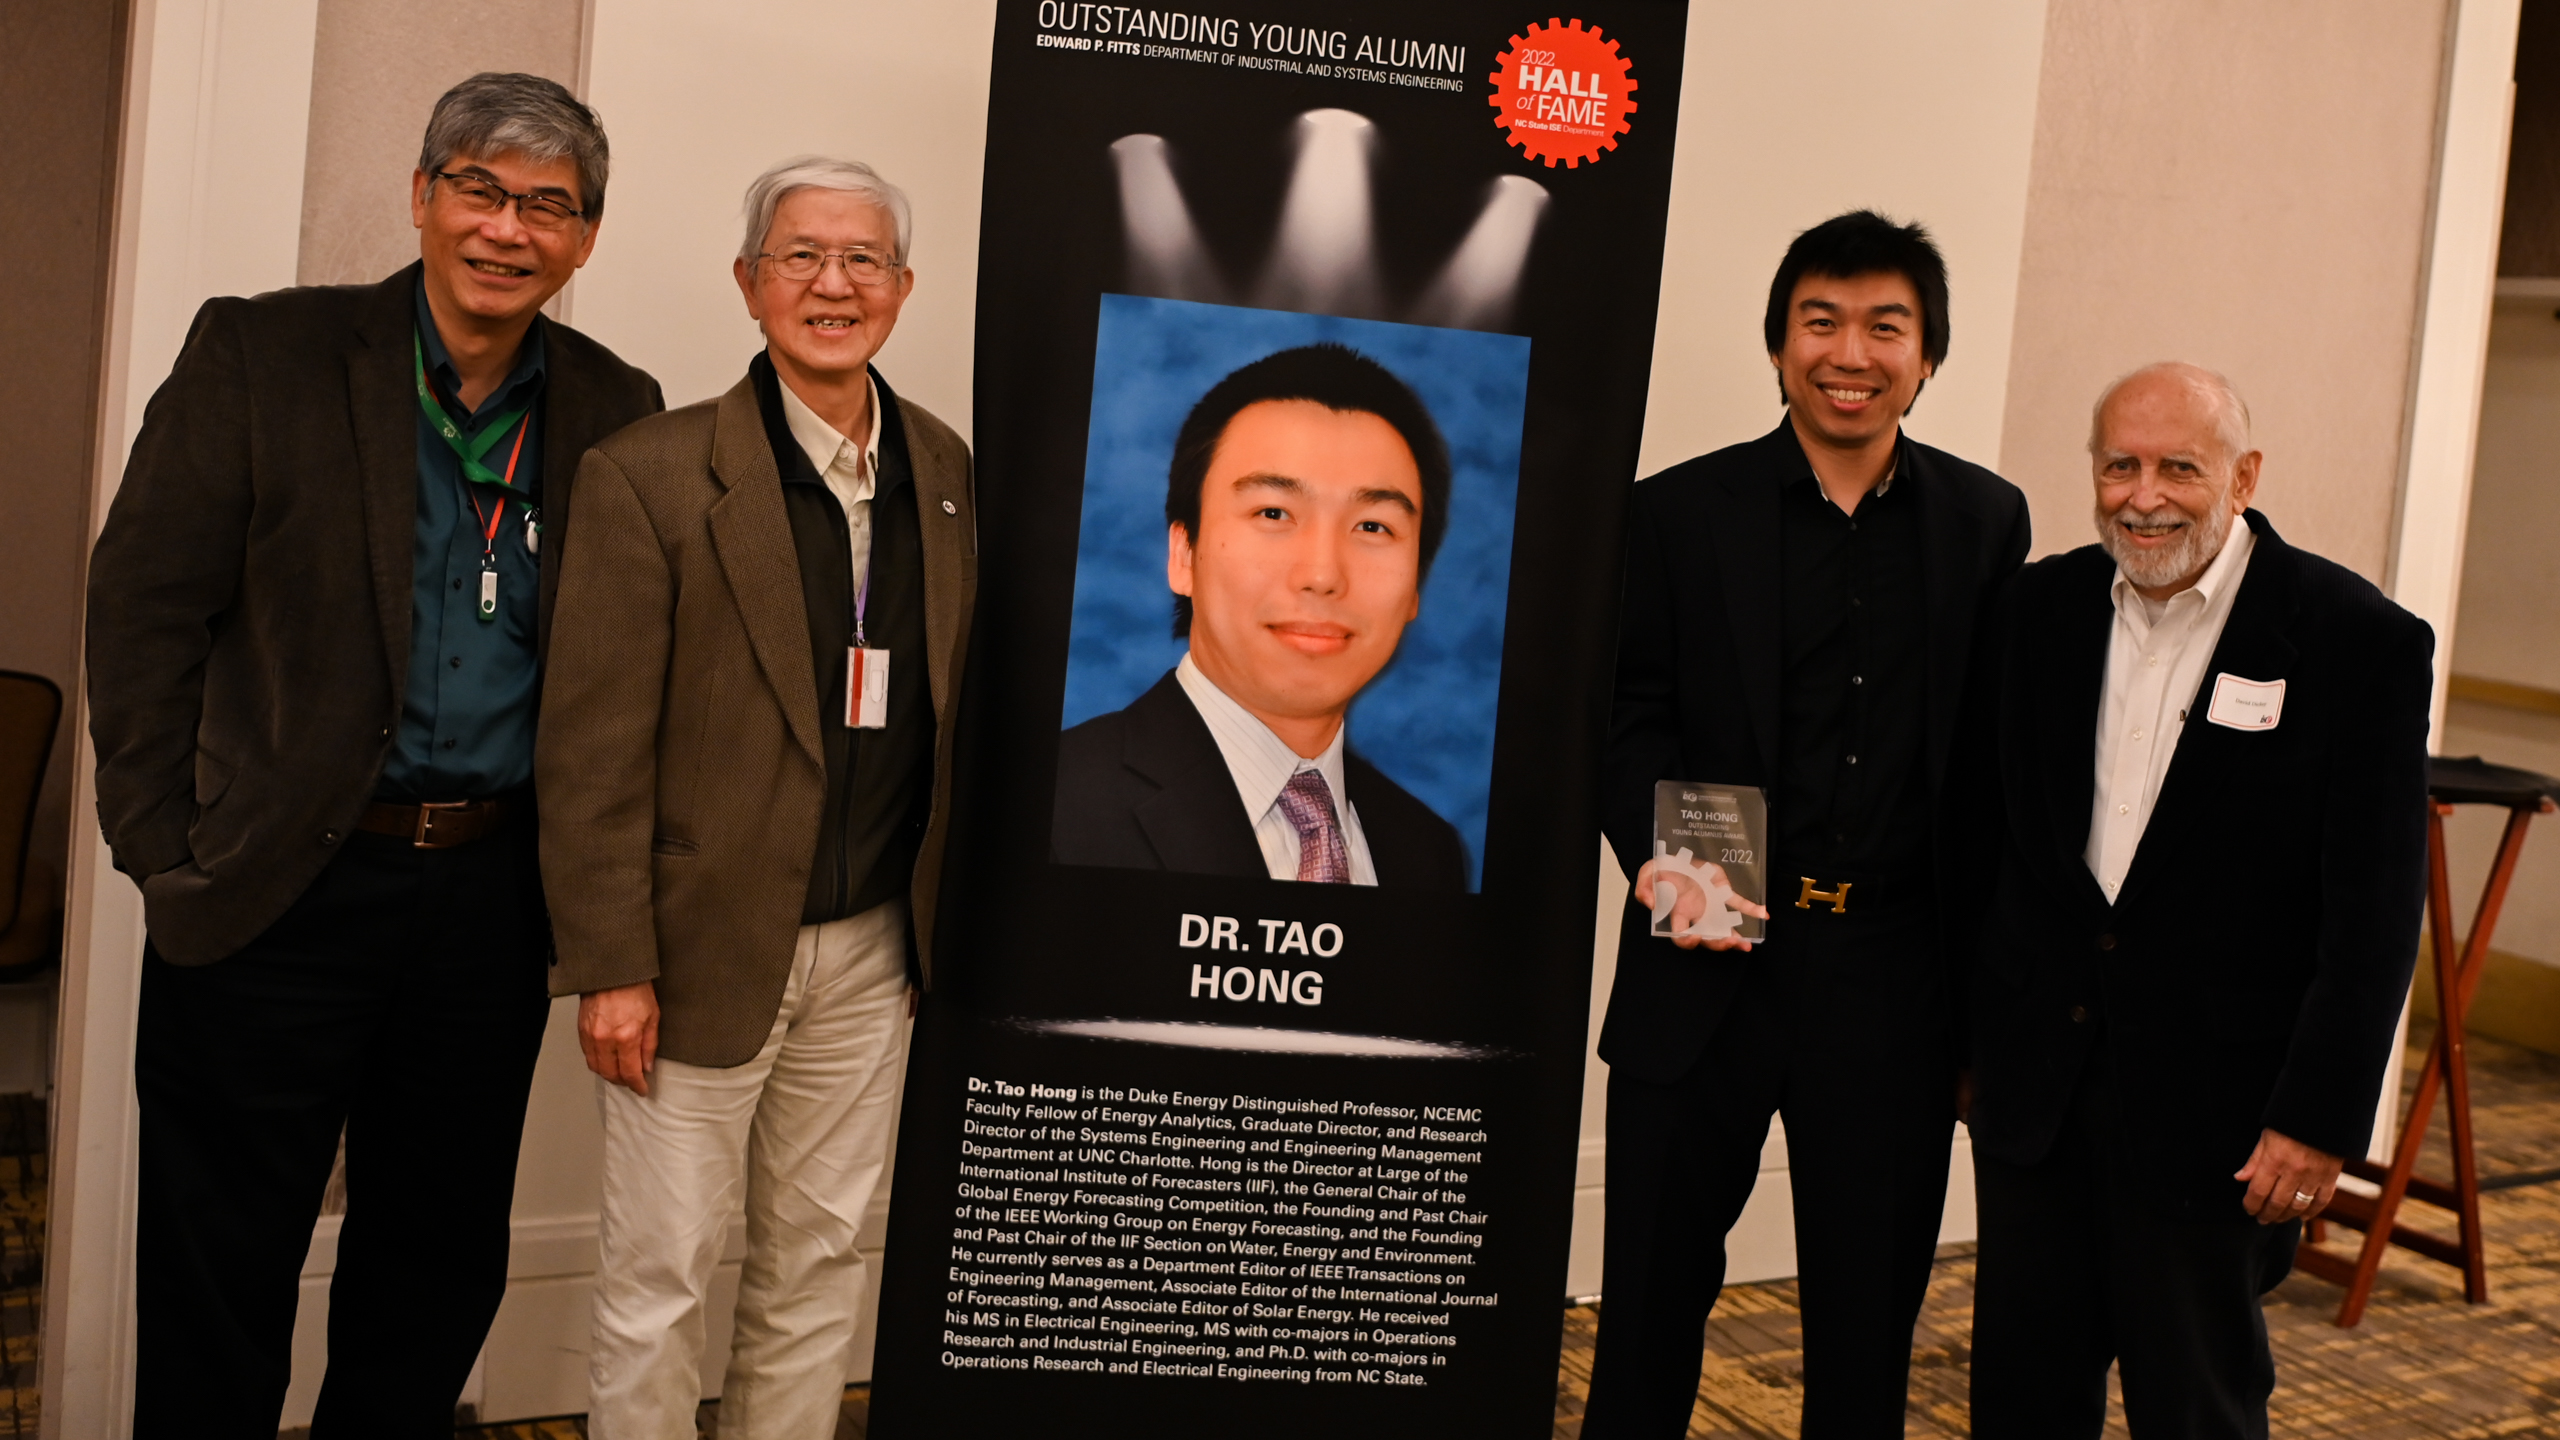 Dr. Tao Hong and faculty members posing in front of his Outstanding Young Alumni banner